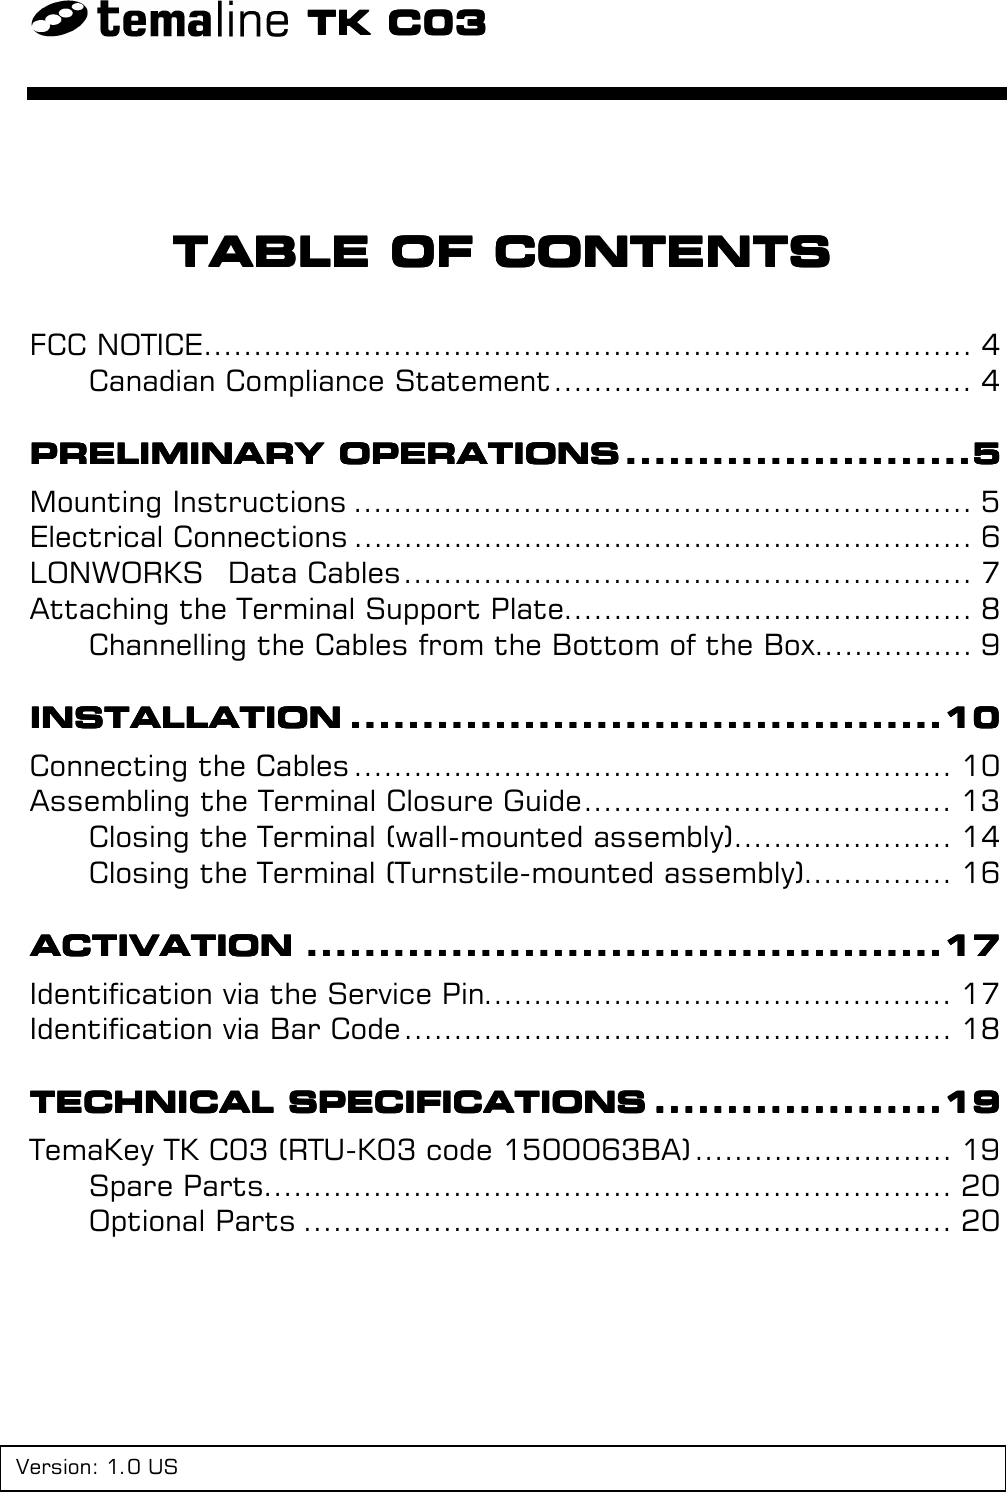  TK C03TK C03TK C03TK C03TABLE OF CONTENTSTABLE OF CONTENTSTABLE OF CONTENTSTABLE OF CONTENTSFCC NOTICE............................................................................. 4Canadian Compliance Statement .......................................... 4PRELIMINARY OPERATIONSPRELIMINARY OPERATIONSPRELIMINARY OPERATIONSPRELIMINARY OPERATIONS ................................................................................................5555Mounting Instructions .............................................................. 5Electrical Connections .............................................................. 6LONWORKS  Data Cables......................................................... 7Attaching the Terminal Support Plate......................................... 8Channelling the Cables from the Bottom of the Box................ 9INSTALLATIONINSTALLATIONINSTALLATIONINSTALLATION ....................................................................................................................................................................10101010Connecting the Cables ............................................................ 10Assembling the Terminal Closure Guide..................................... 13Closing the Terminal (wall-mounted assembly)...................... 14Closing the Terminal (Turnstile-mounted assembly)............... 16ACTIVATIONACTIVATIONACTIVATIONACTIVATION ................................................................................................................................................................................17171717Identification via the Service Pin............................................... 17Identification via Bar Code ....................................................... 18TECHNICAL SPECIFICATIONSTECHNICAL SPECIFICATIONSTECHNICAL SPECIFICATIONSTECHNICAL SPECIFICATIONS ................................................................................19191919TemaKey TK C03 (RTU-K03 code 1500063BA) .......................... 19Spare Parts..................................................................... 20Optional Parts ................................................................. 20Version: 1.0 US